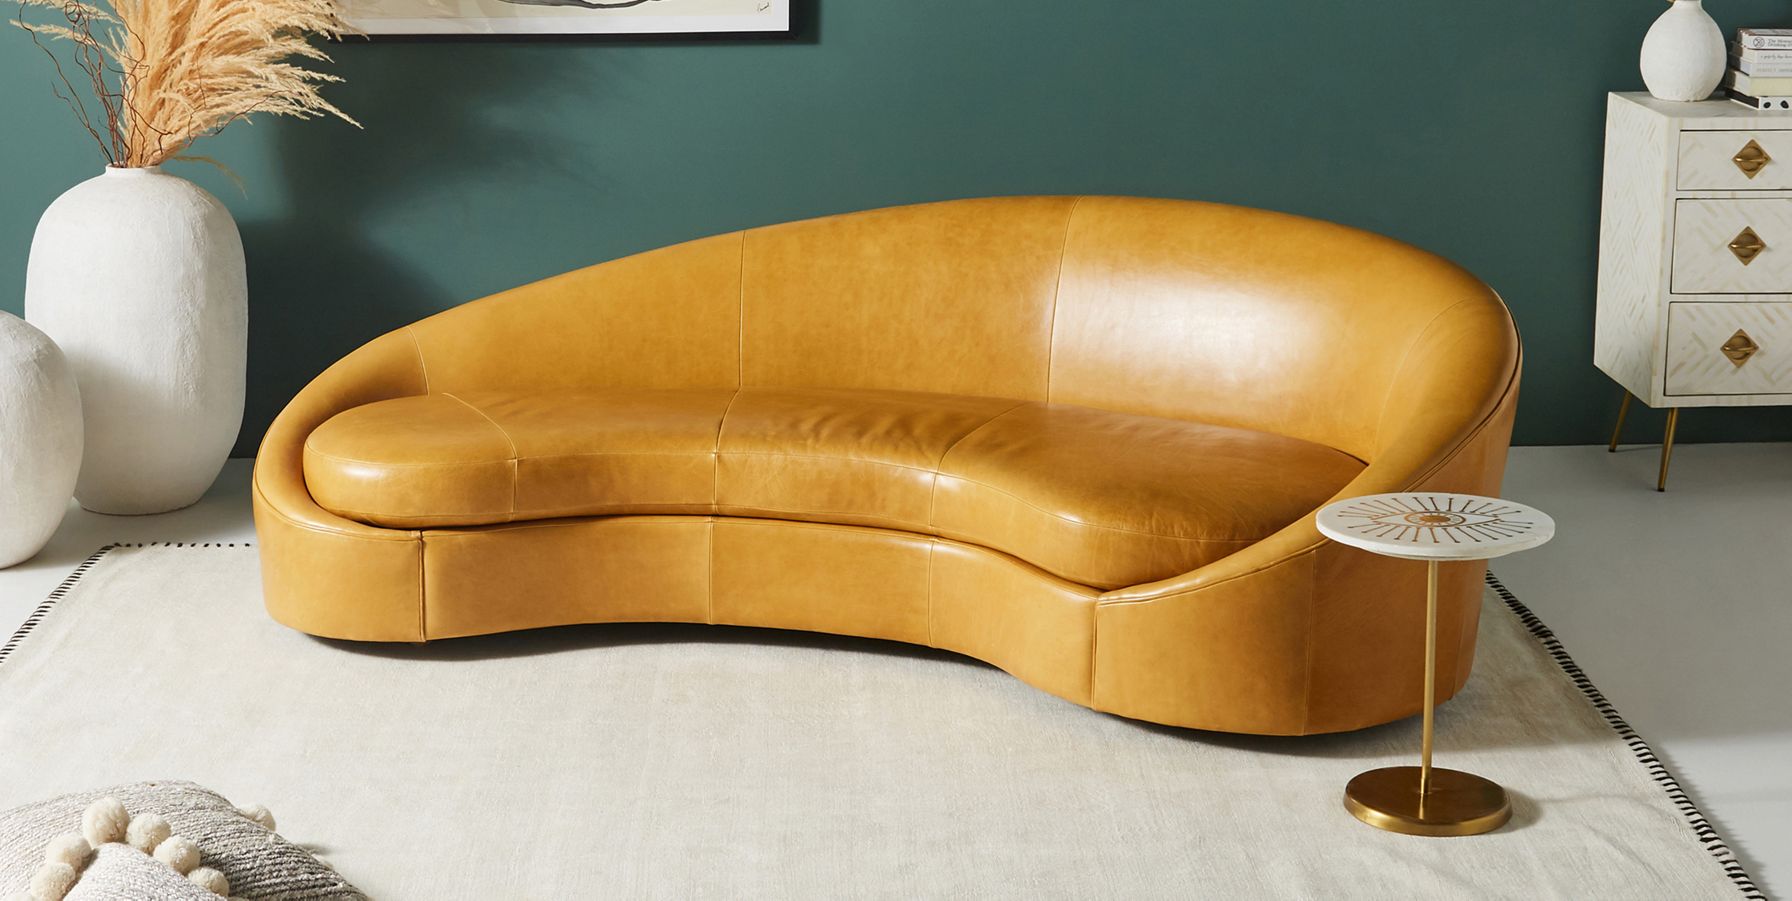 Goleta Leather Sofa Anthropologie, Curved Leather Couches